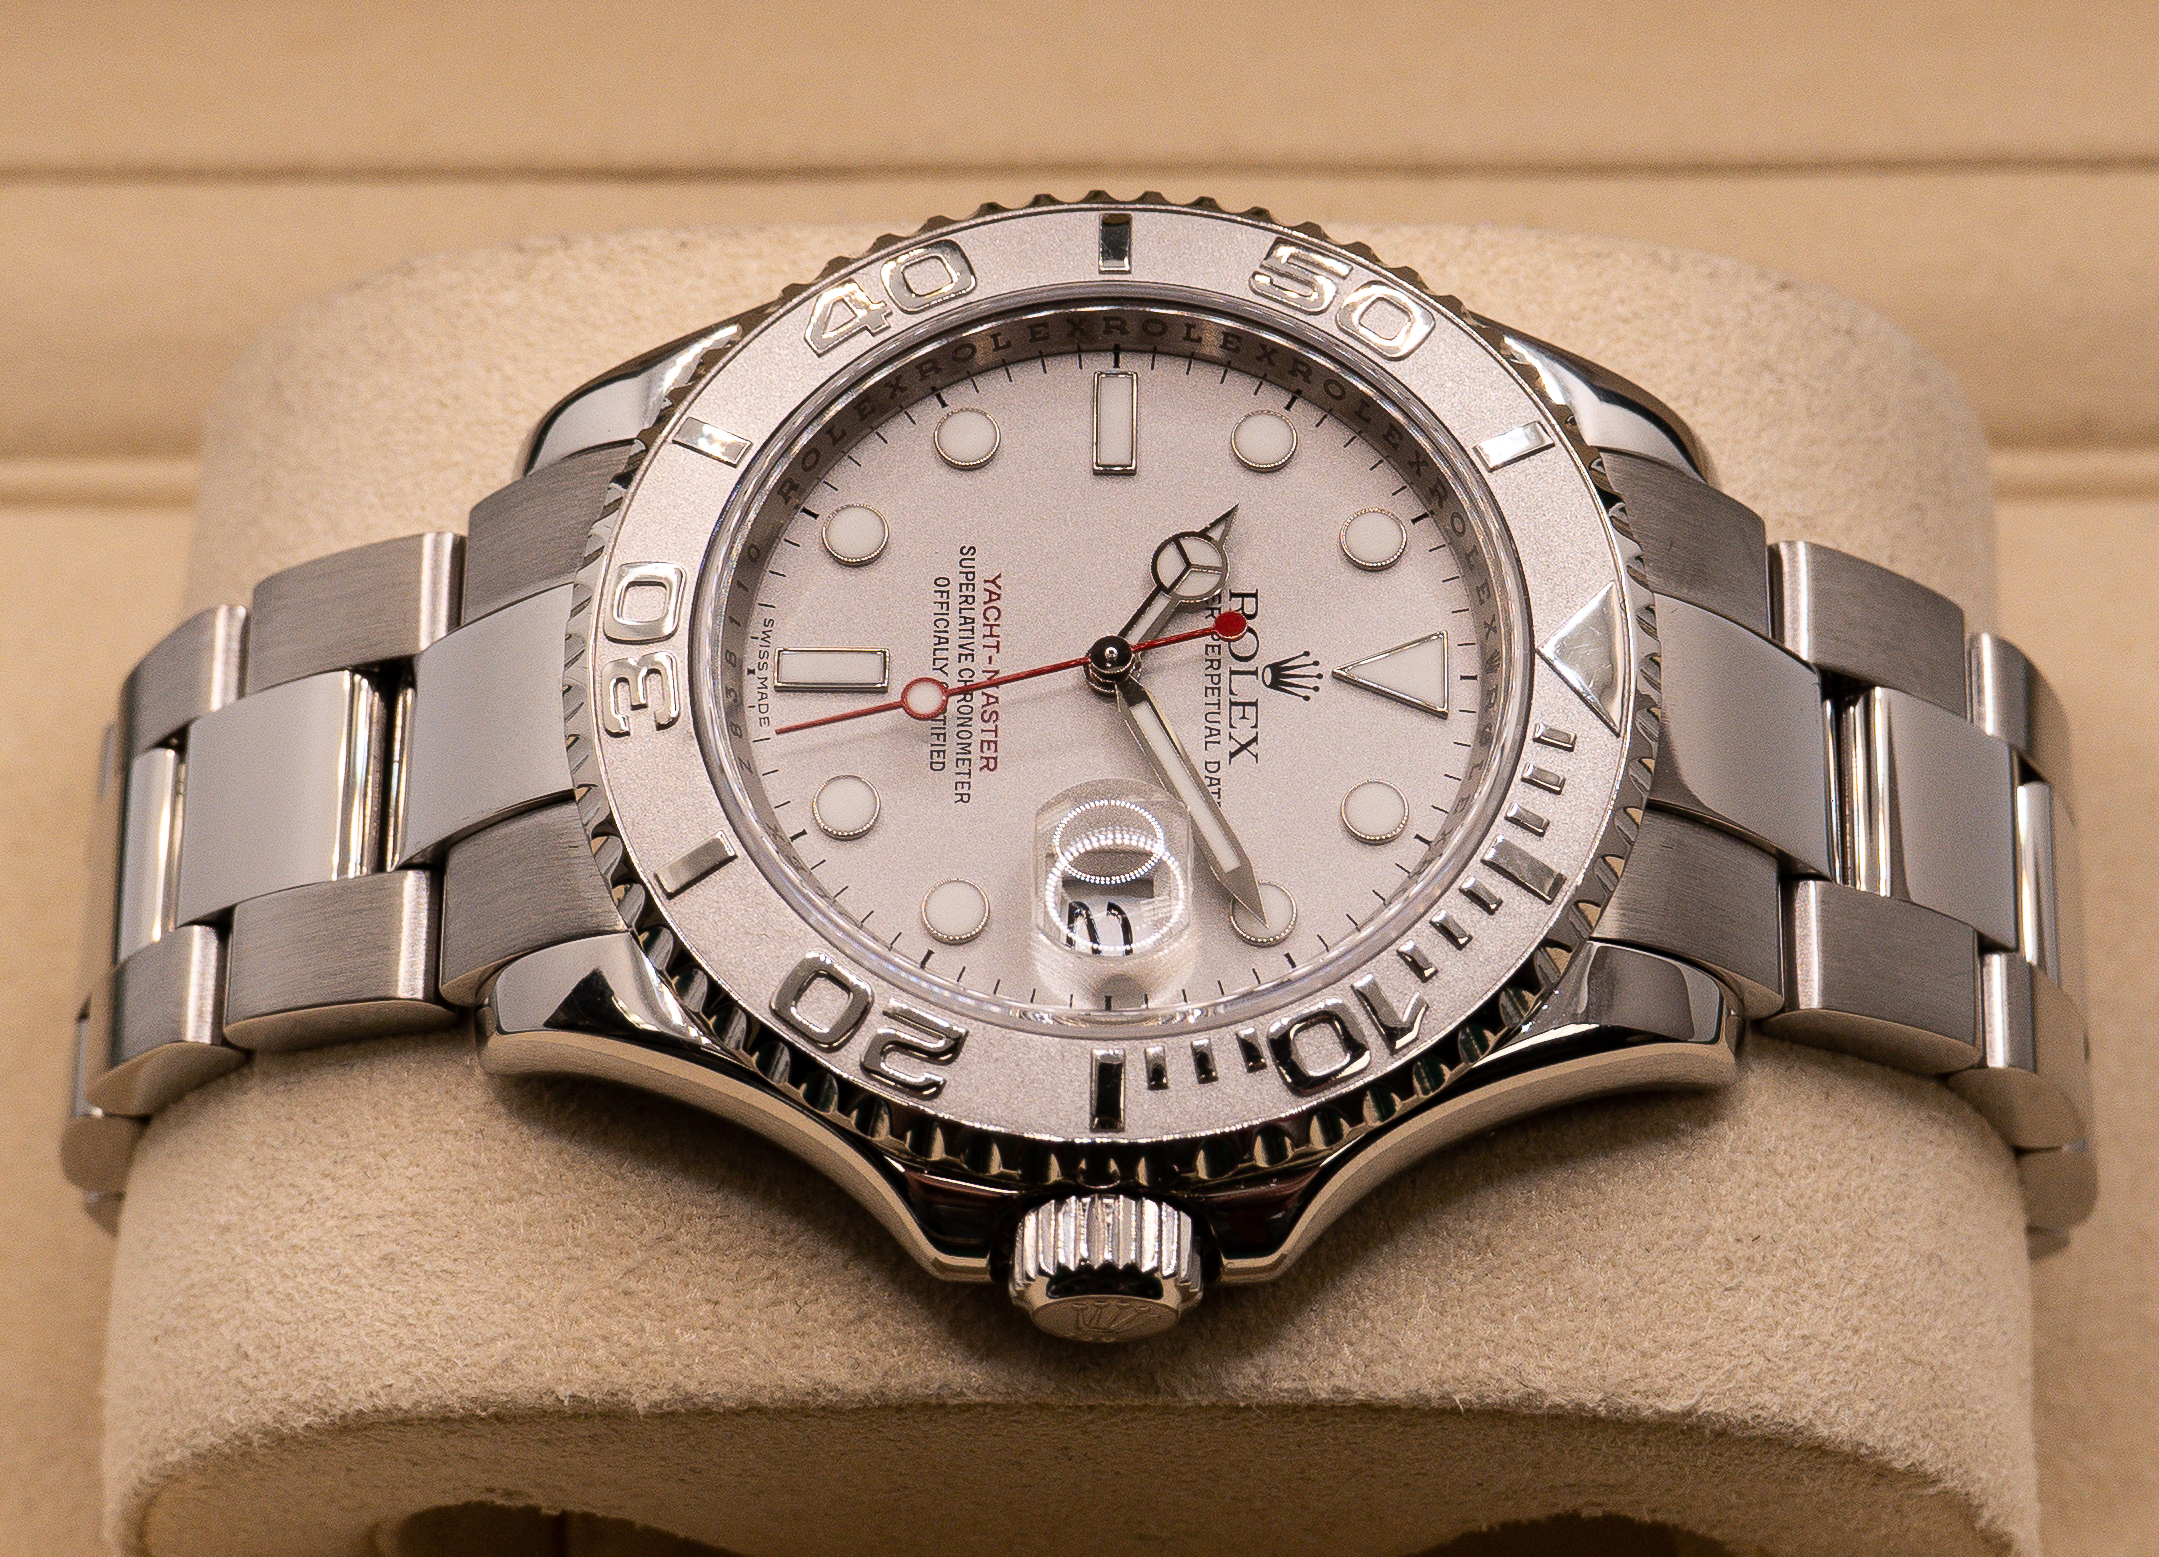 TopNotch Watch offers used Rolexes across California.